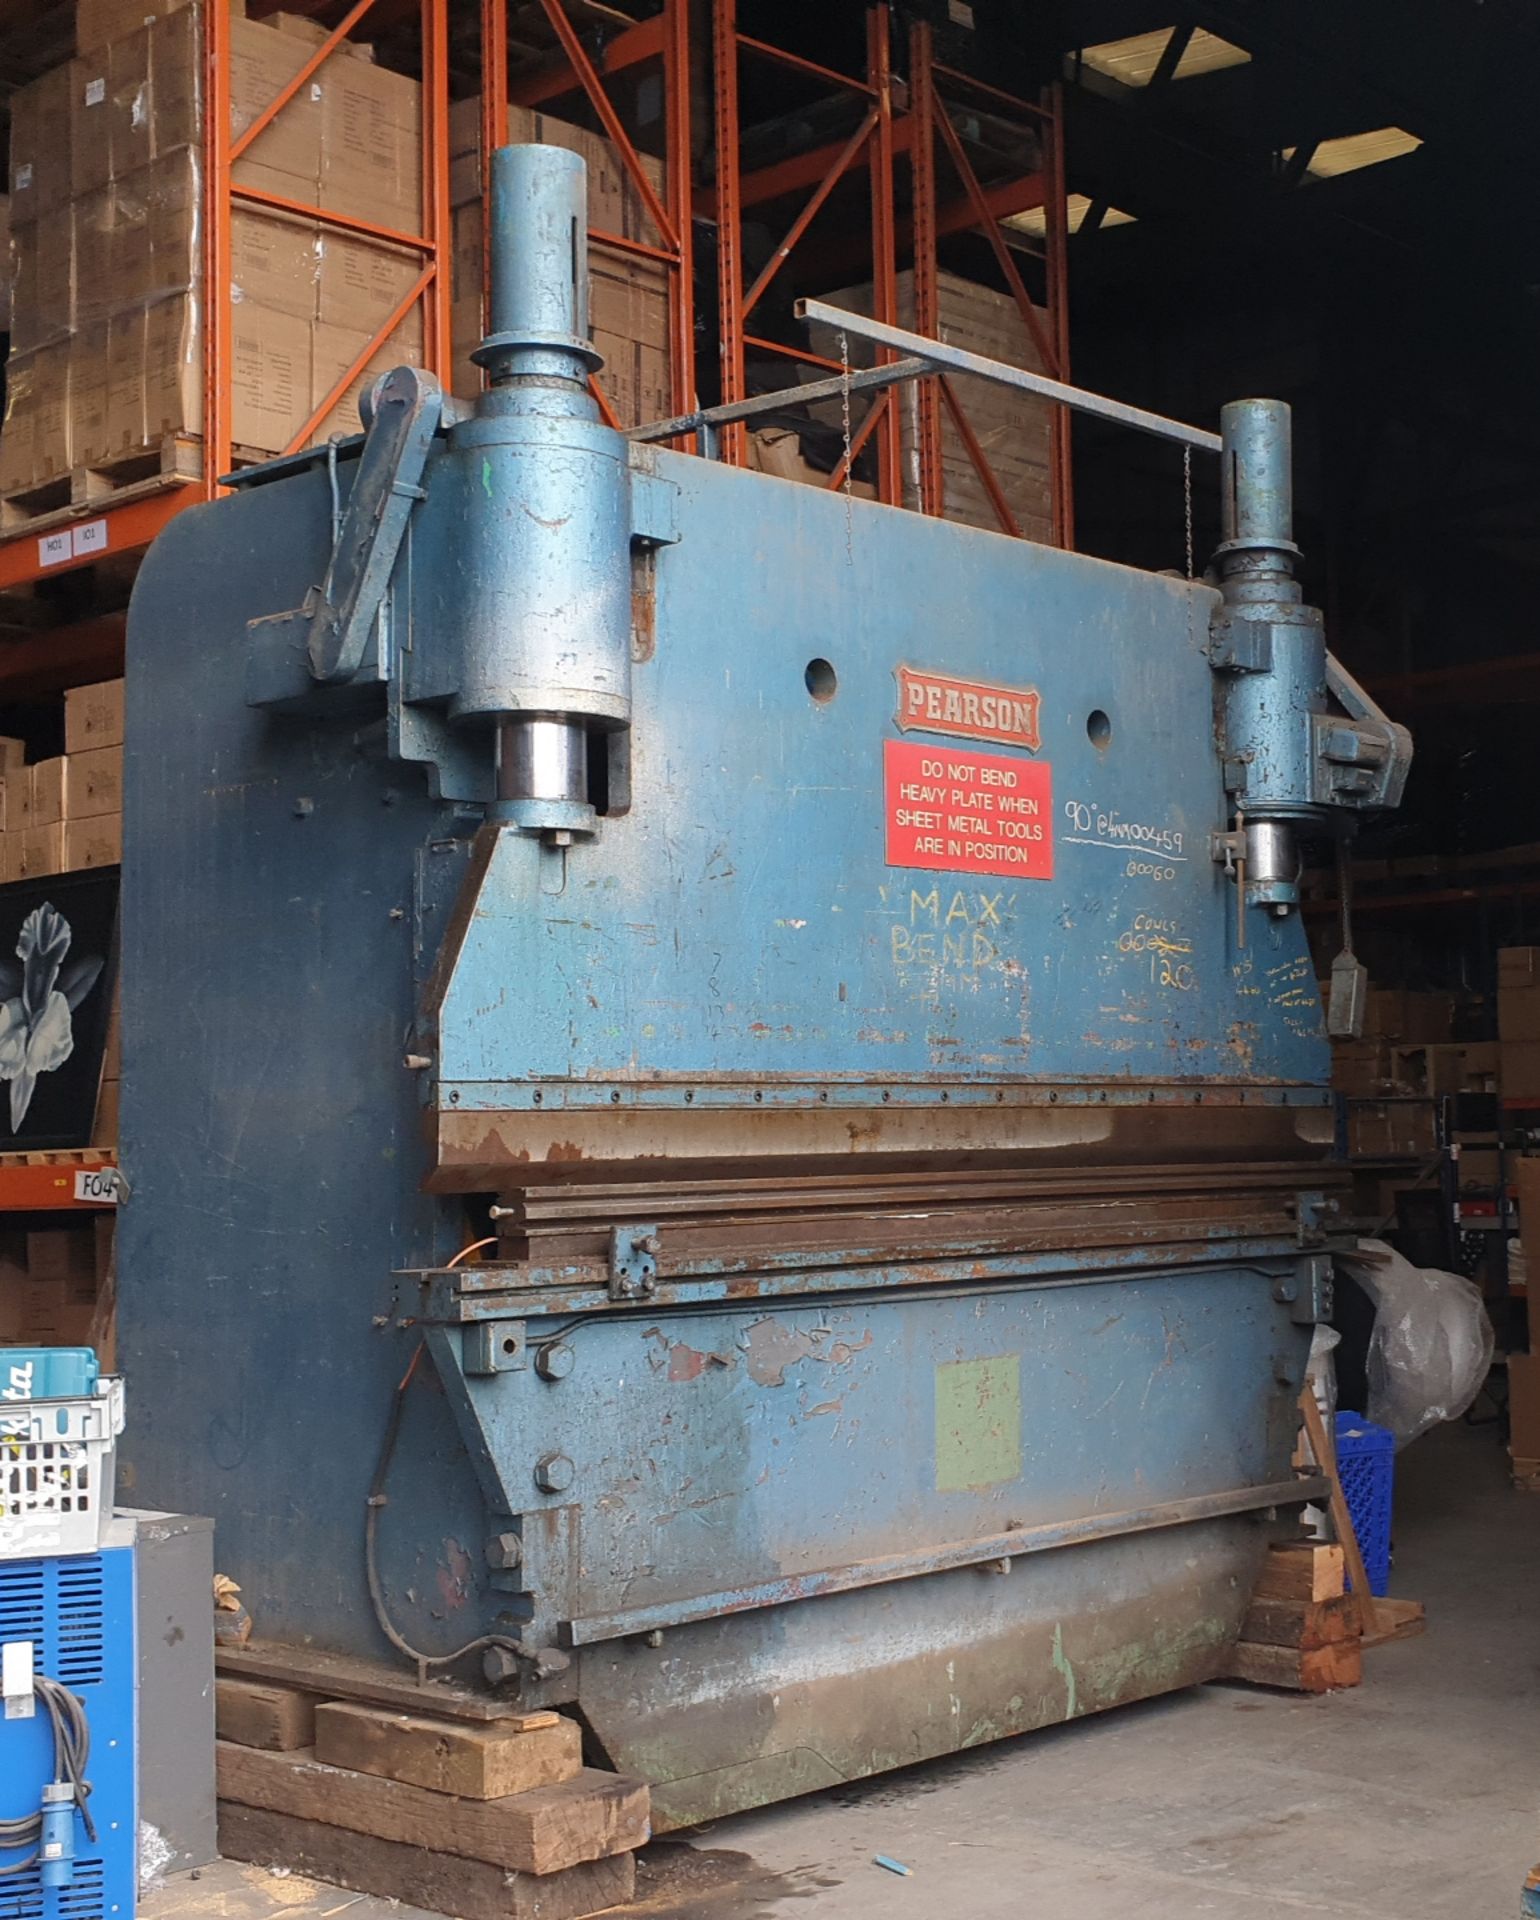 (LOT FOR THURSDAY 28TH MAY AUCTION 12 NOON) 10' PEARSON 280T BRAKE PRESS YEAR 1987 - NO VISIBLE